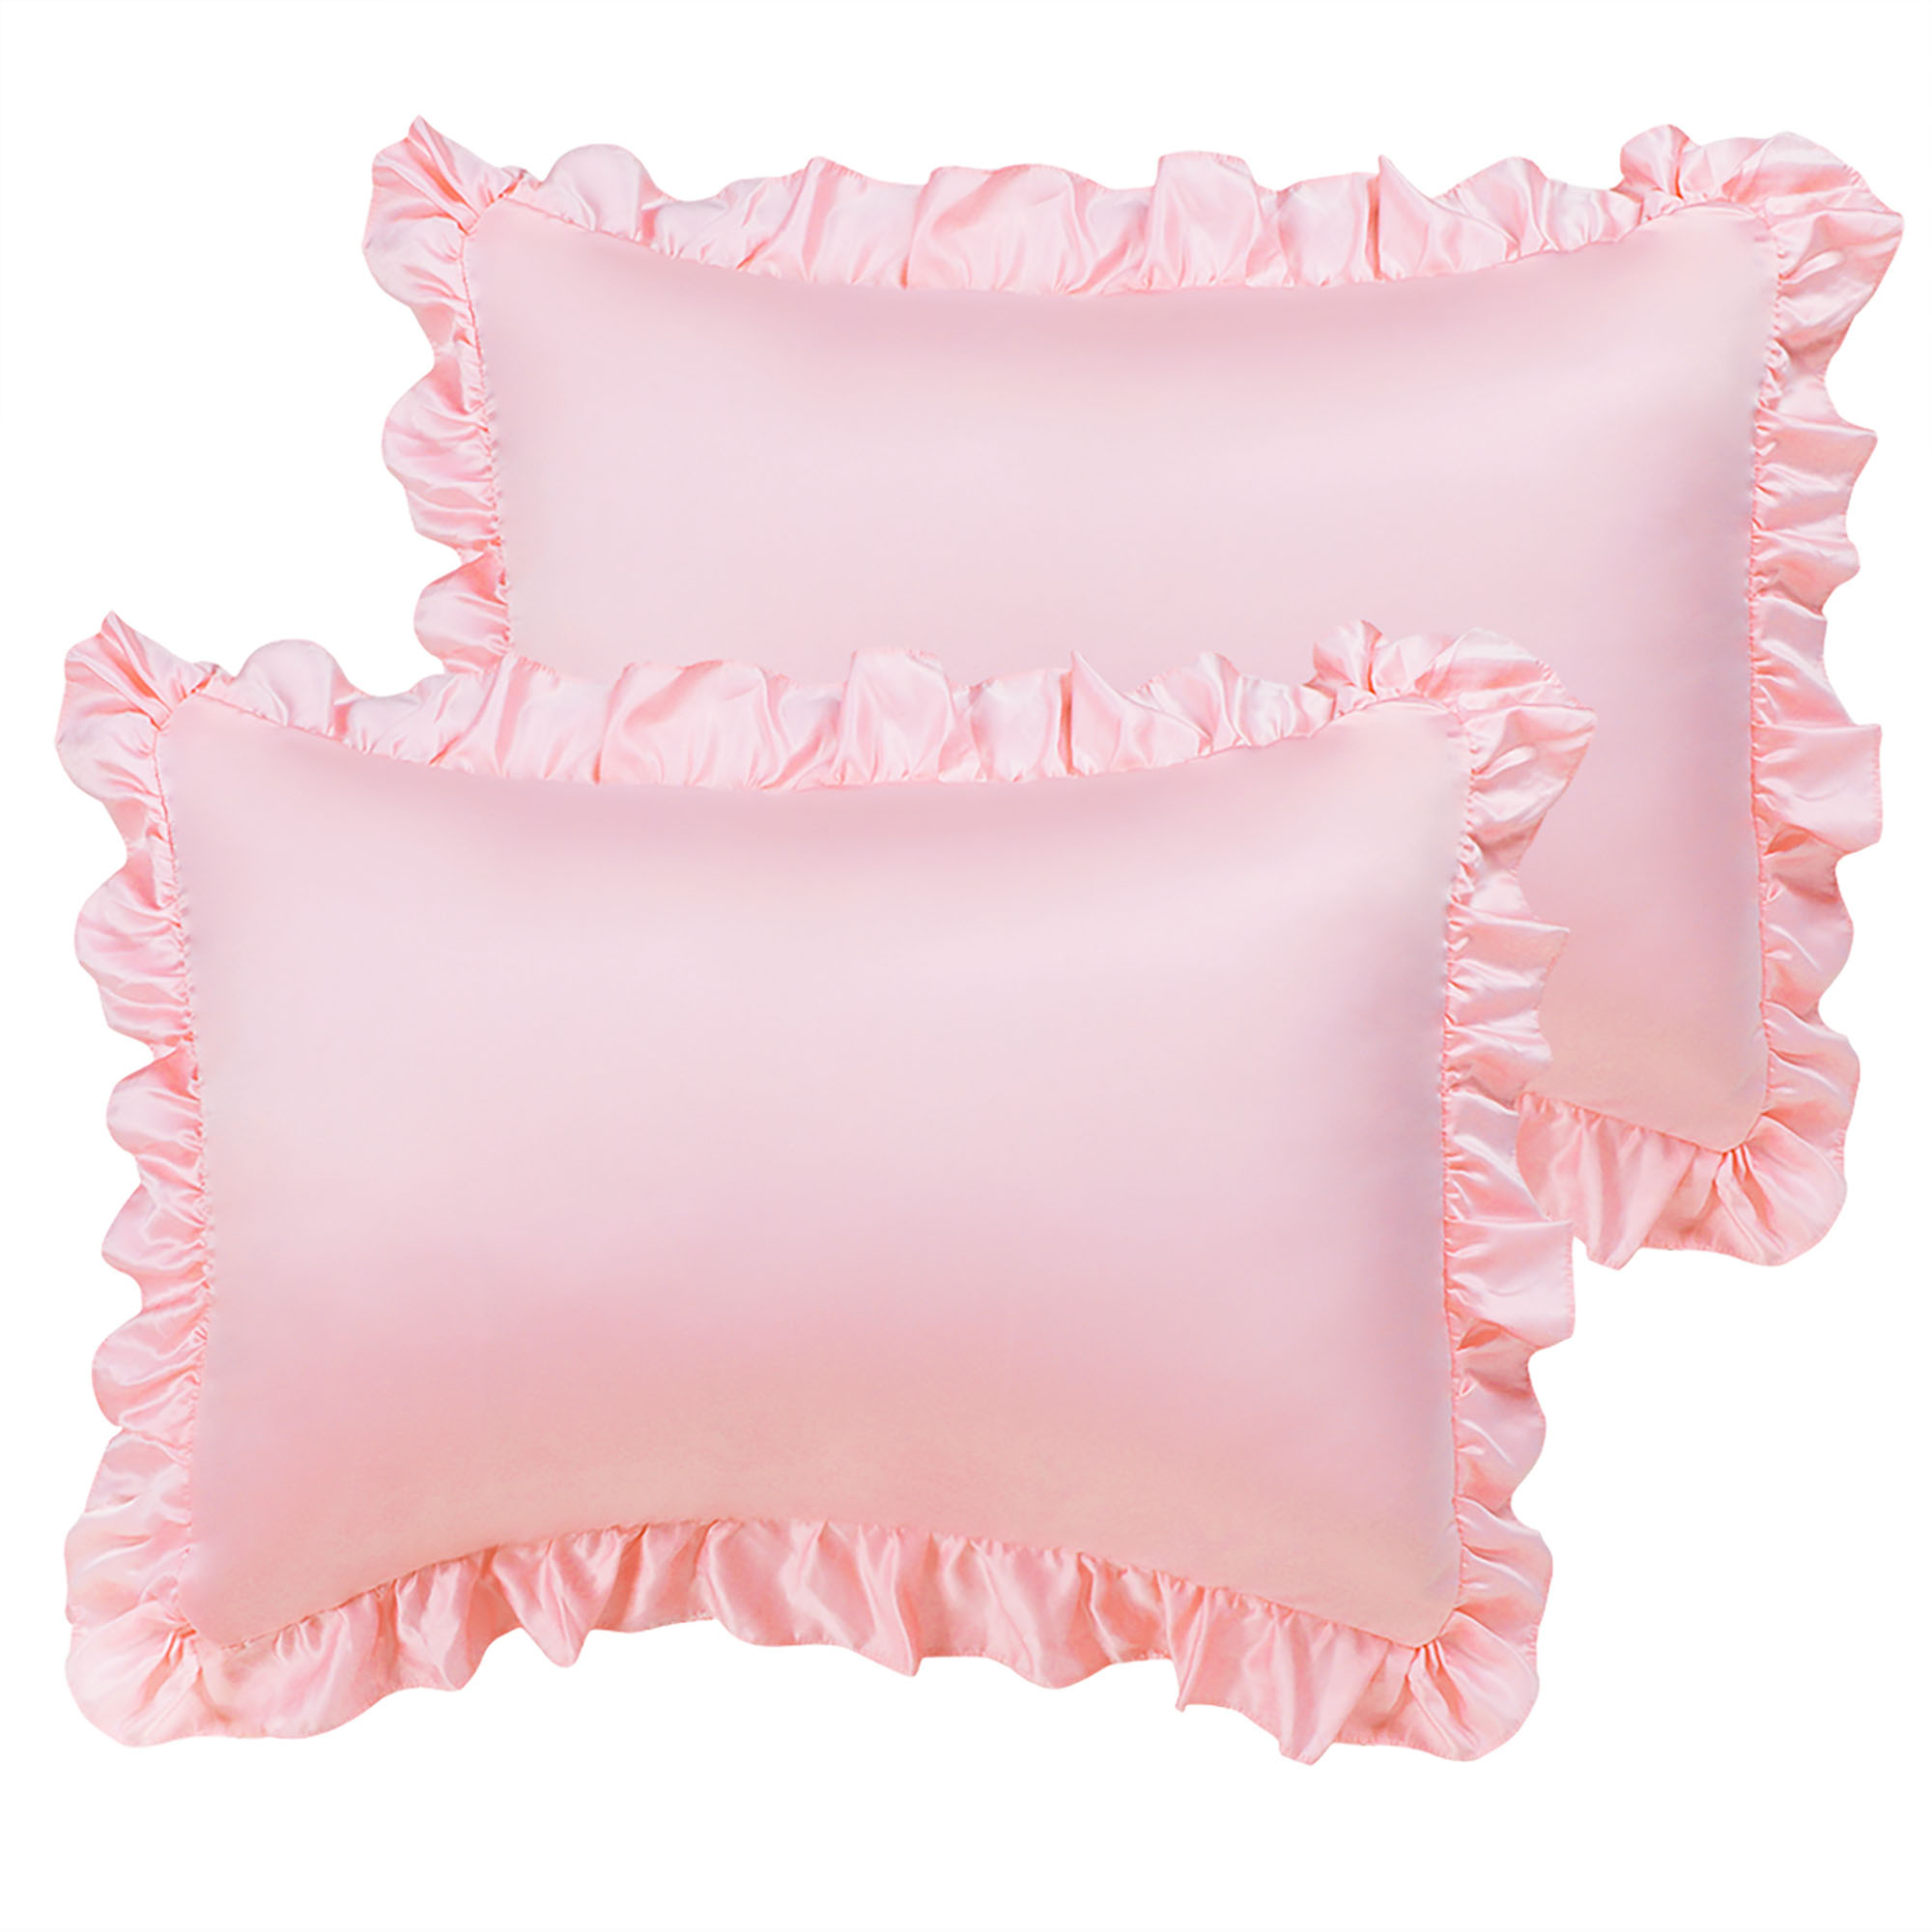 Luxury Frilled Pillow case Plain Dyed Microfiber Oxford Frilly Edge Pillow Cover